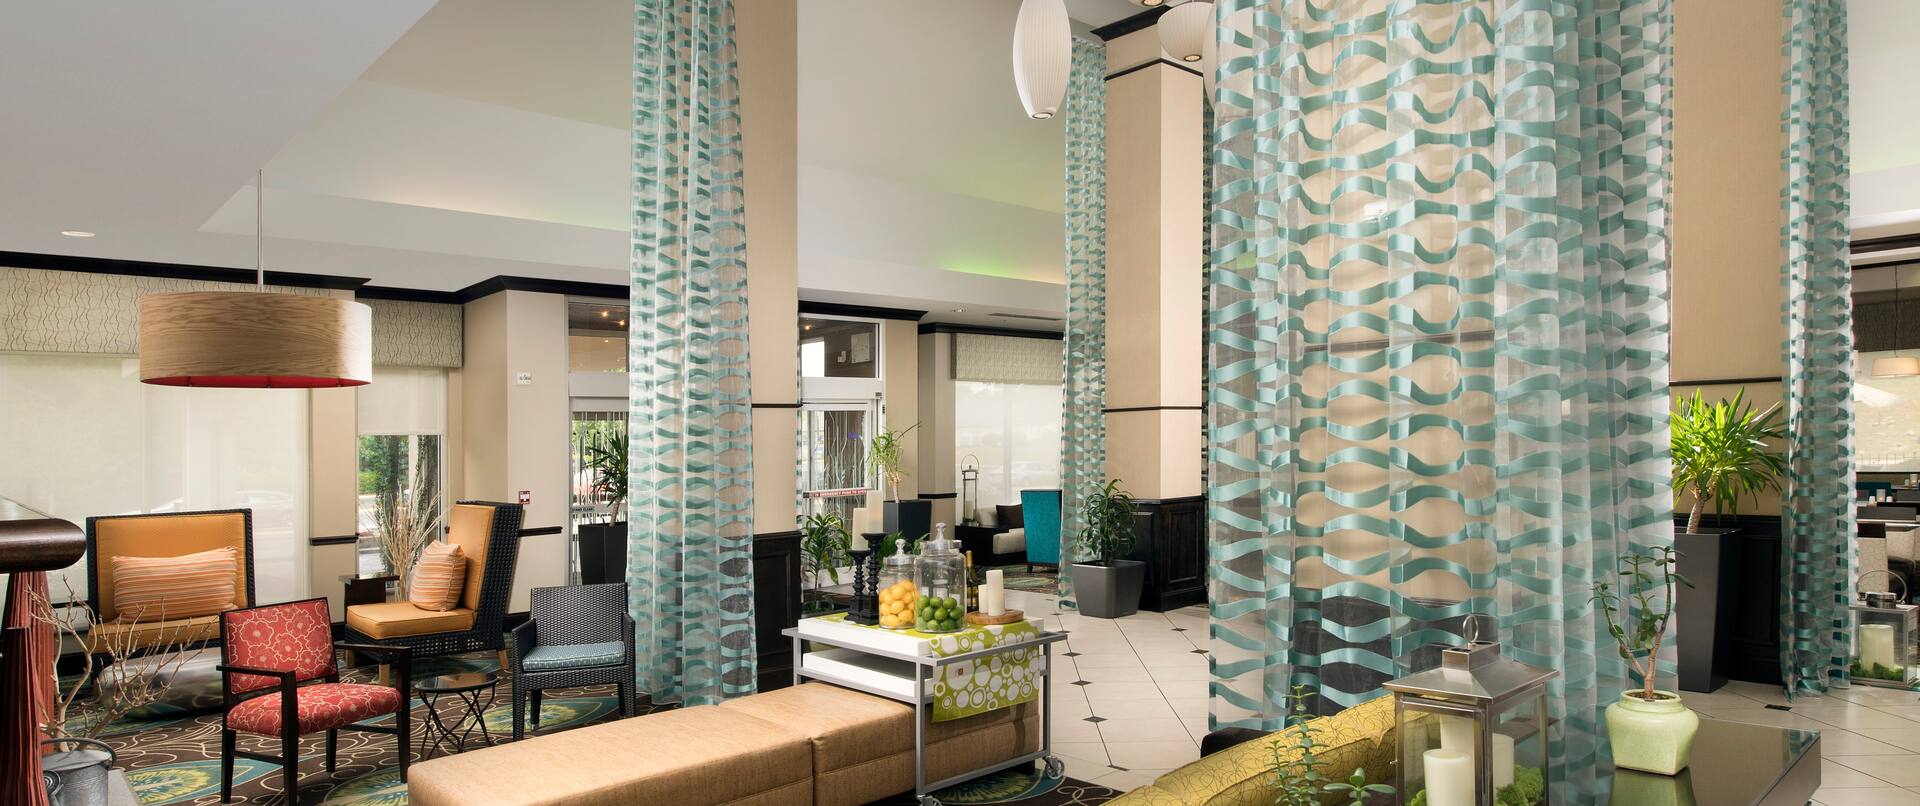 Full View of Hotel Lobby Lounge Area With Beverage Station